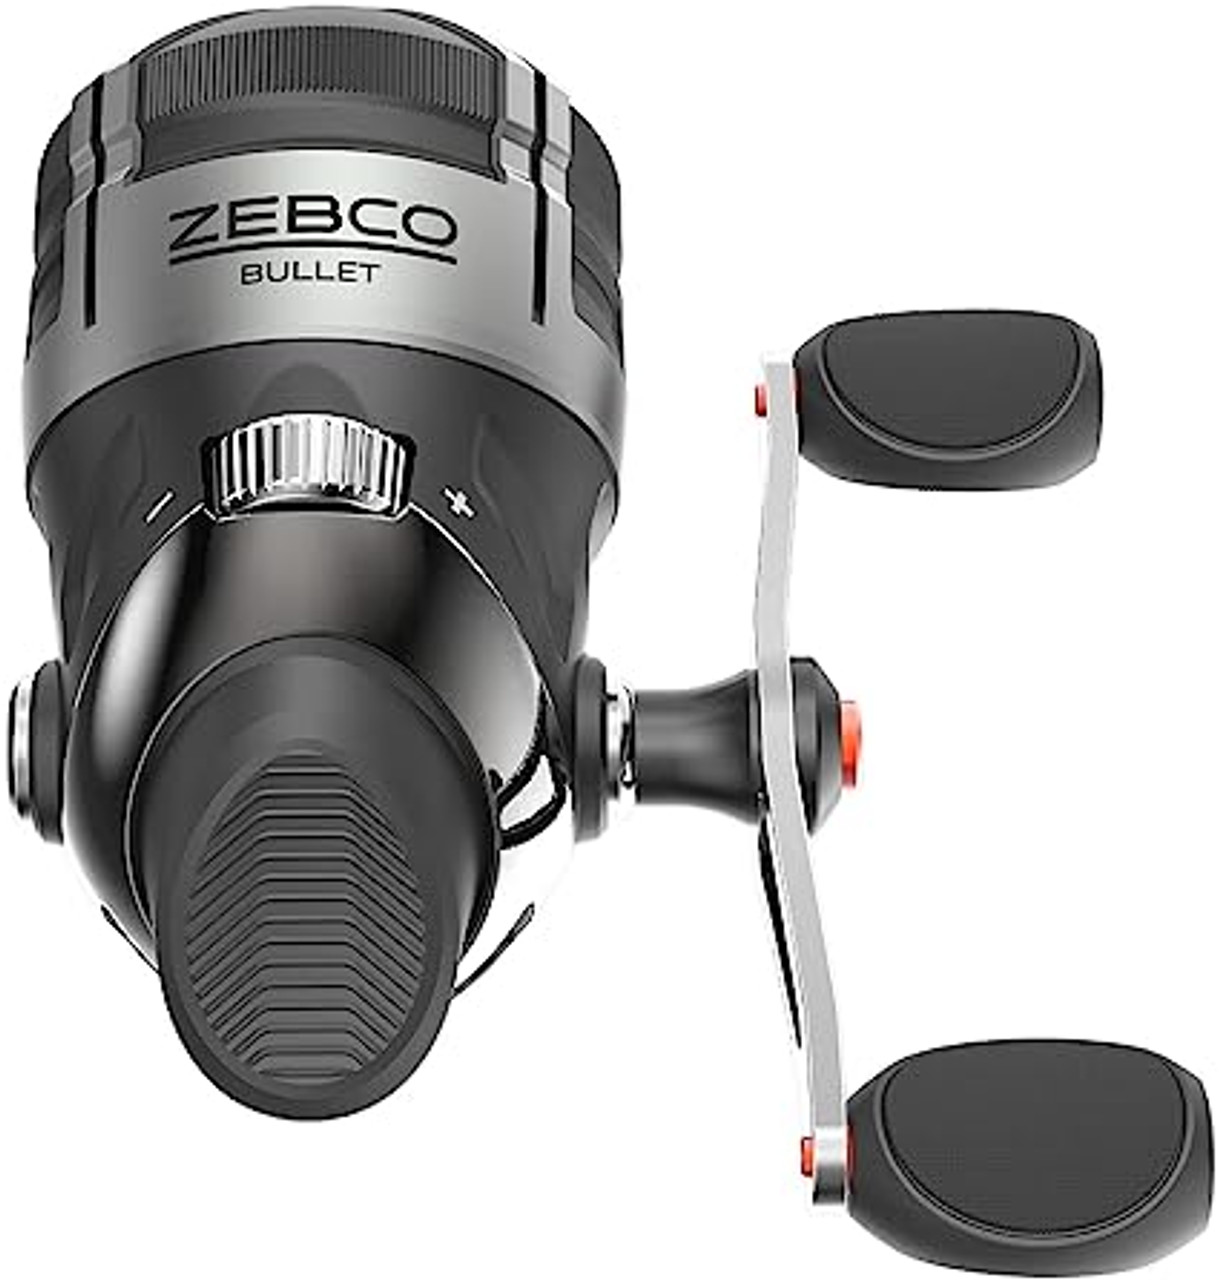 Zebco Bullet Spincast Reel, Size 30 Pre-Spooled with 10-Pound